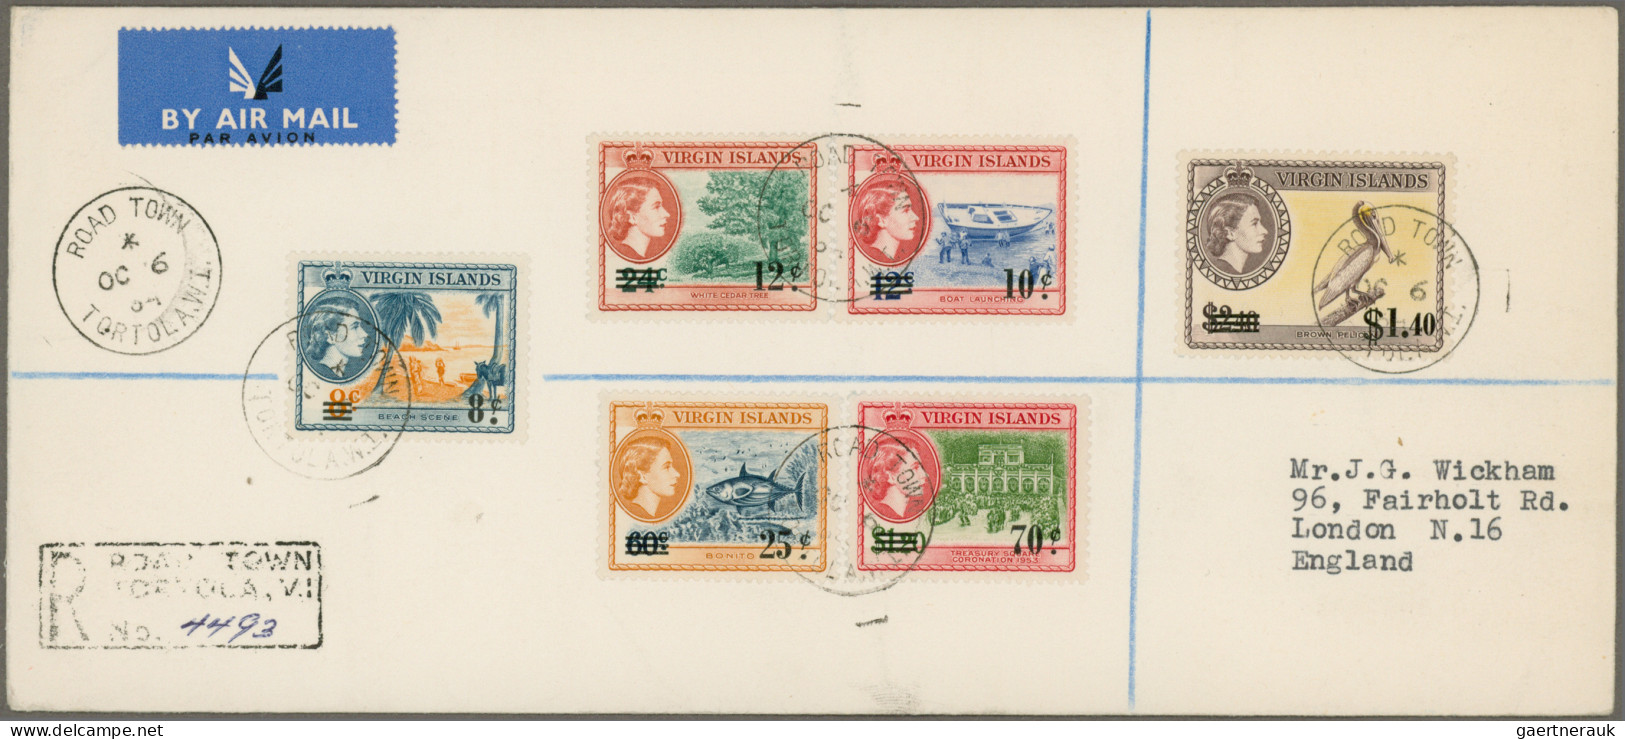 Virgin Islands: 1962/1964, Definitives "Pictorials" In US Currency, Two Sets On - British Virgin Islands